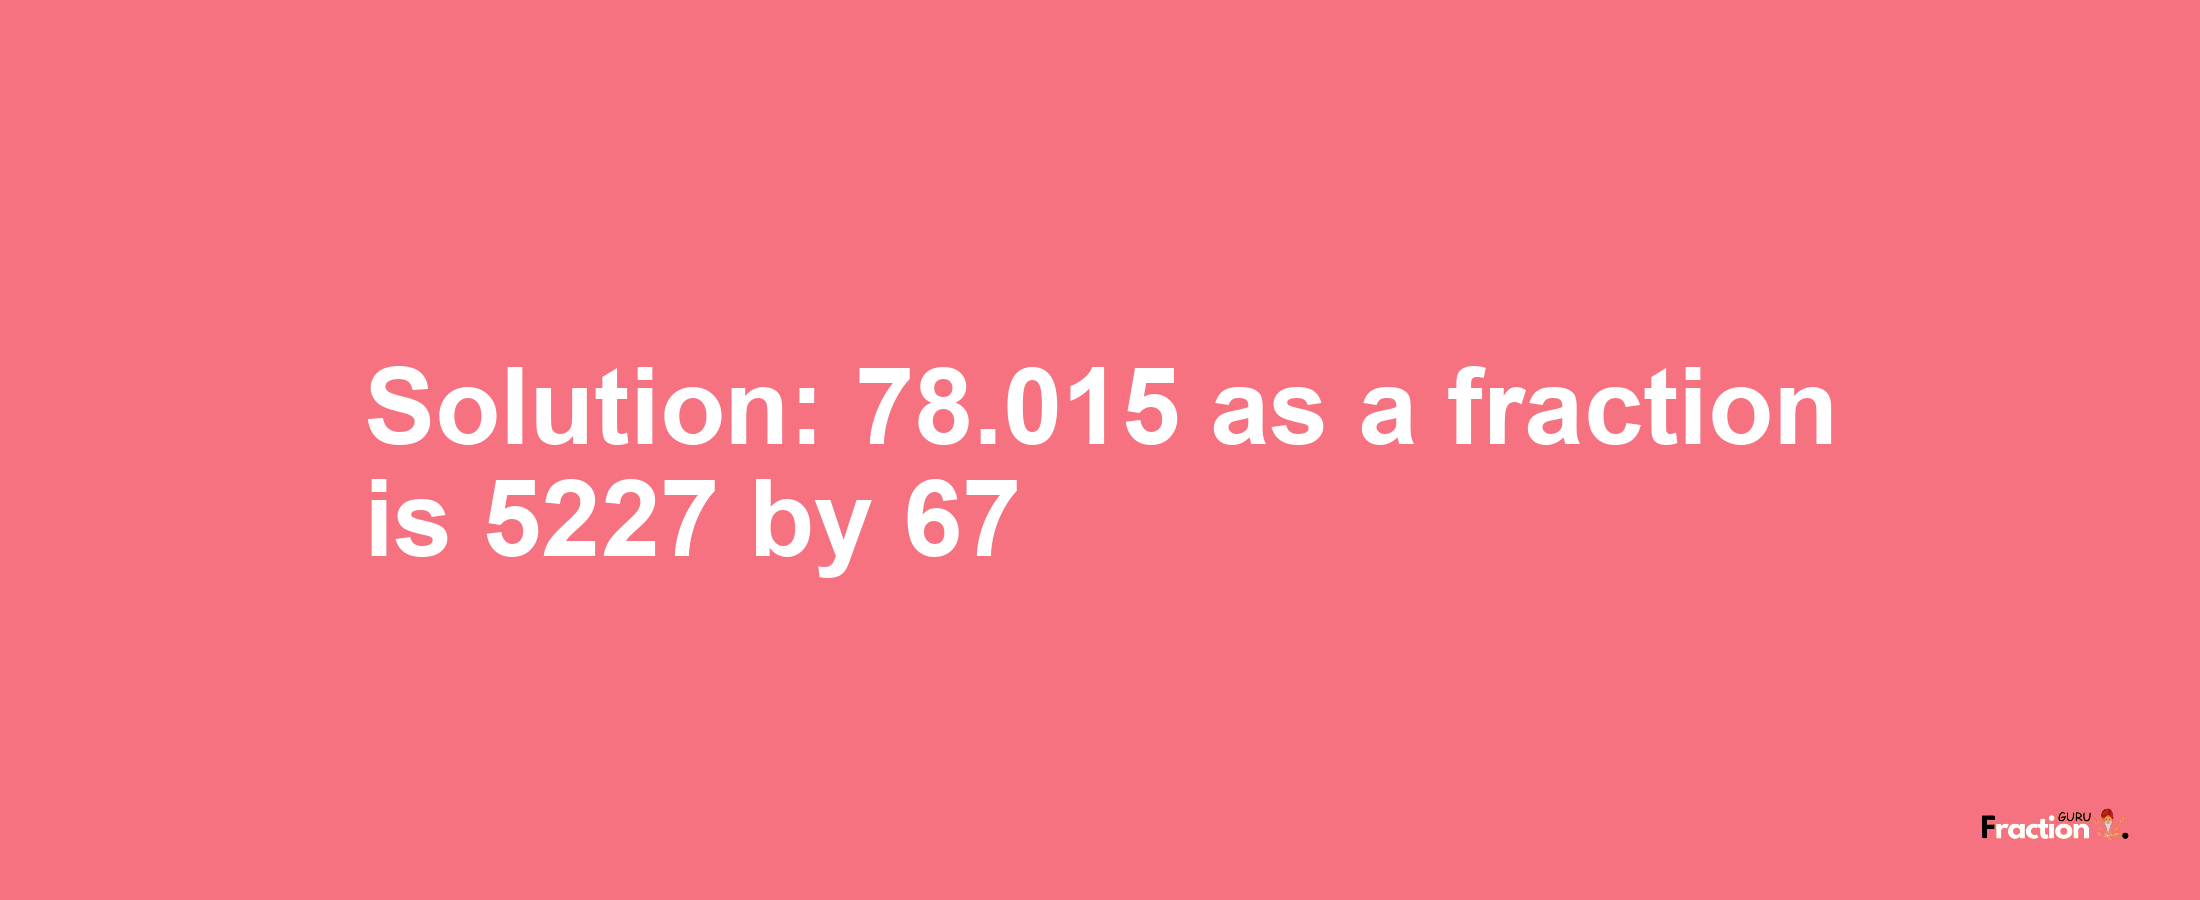 Solution:78.015 as a fraction is 5227/67